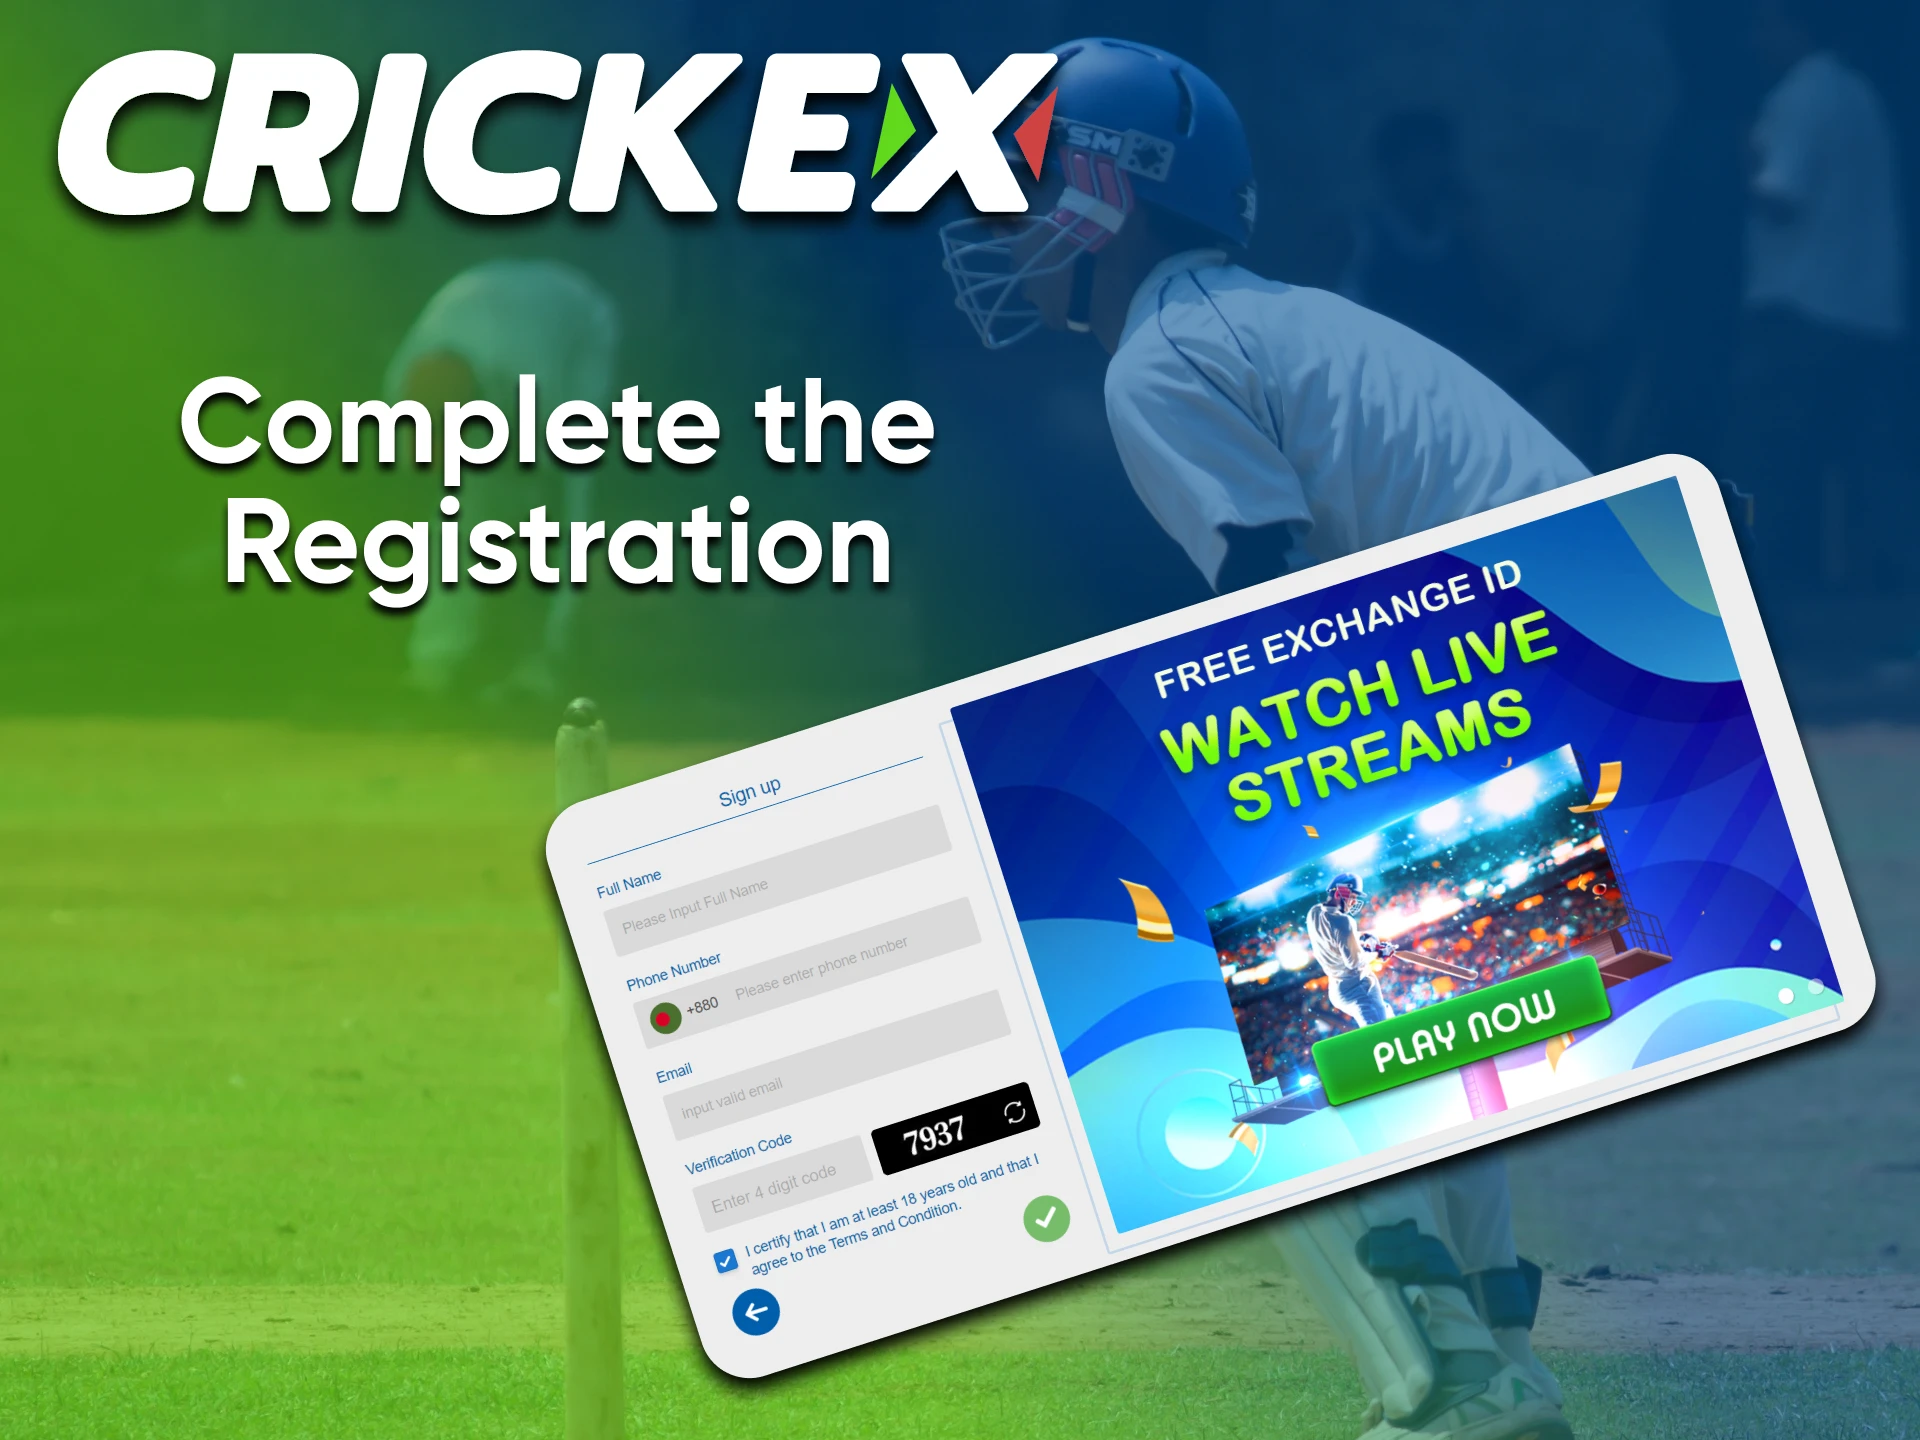 Complete all registration conditions to successfully create a Crickex account.